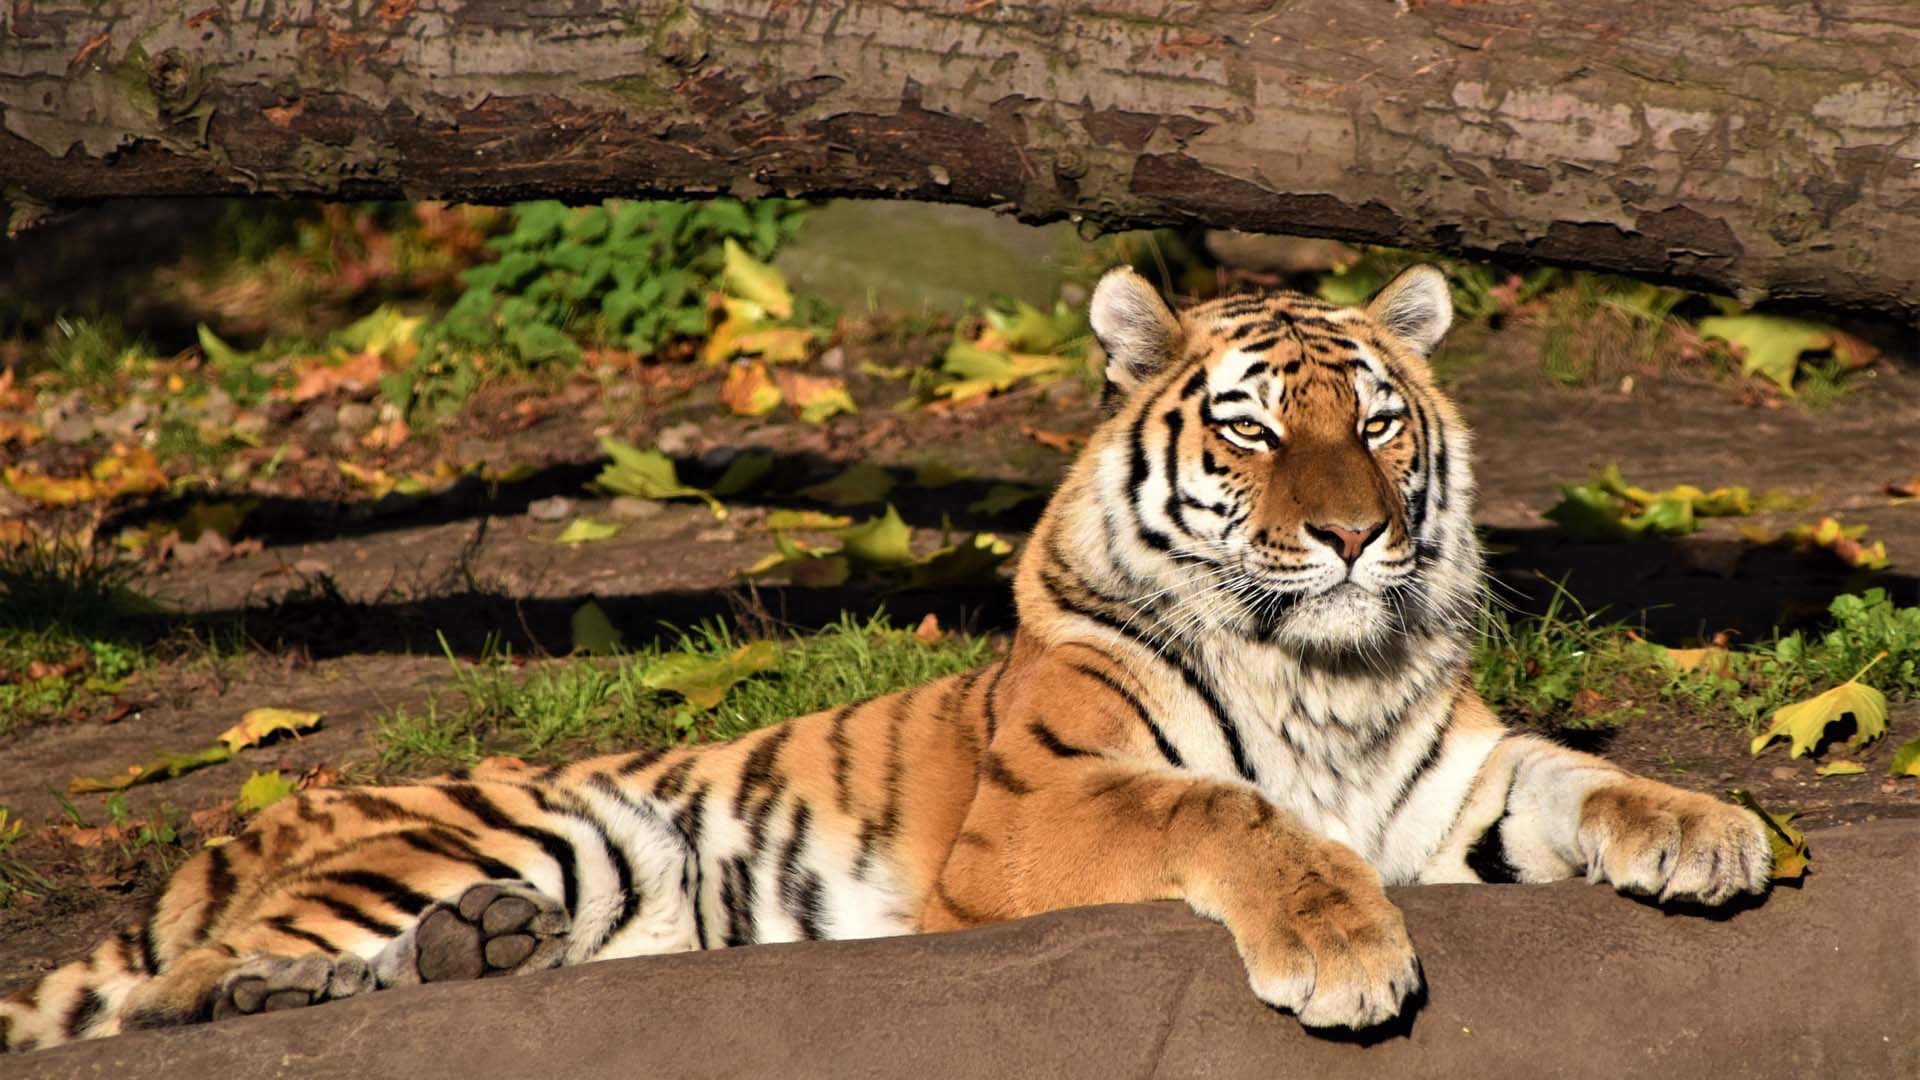 Tiger Is Lying Down On Stone In Tree Trunk Wallpaper HD Tiger